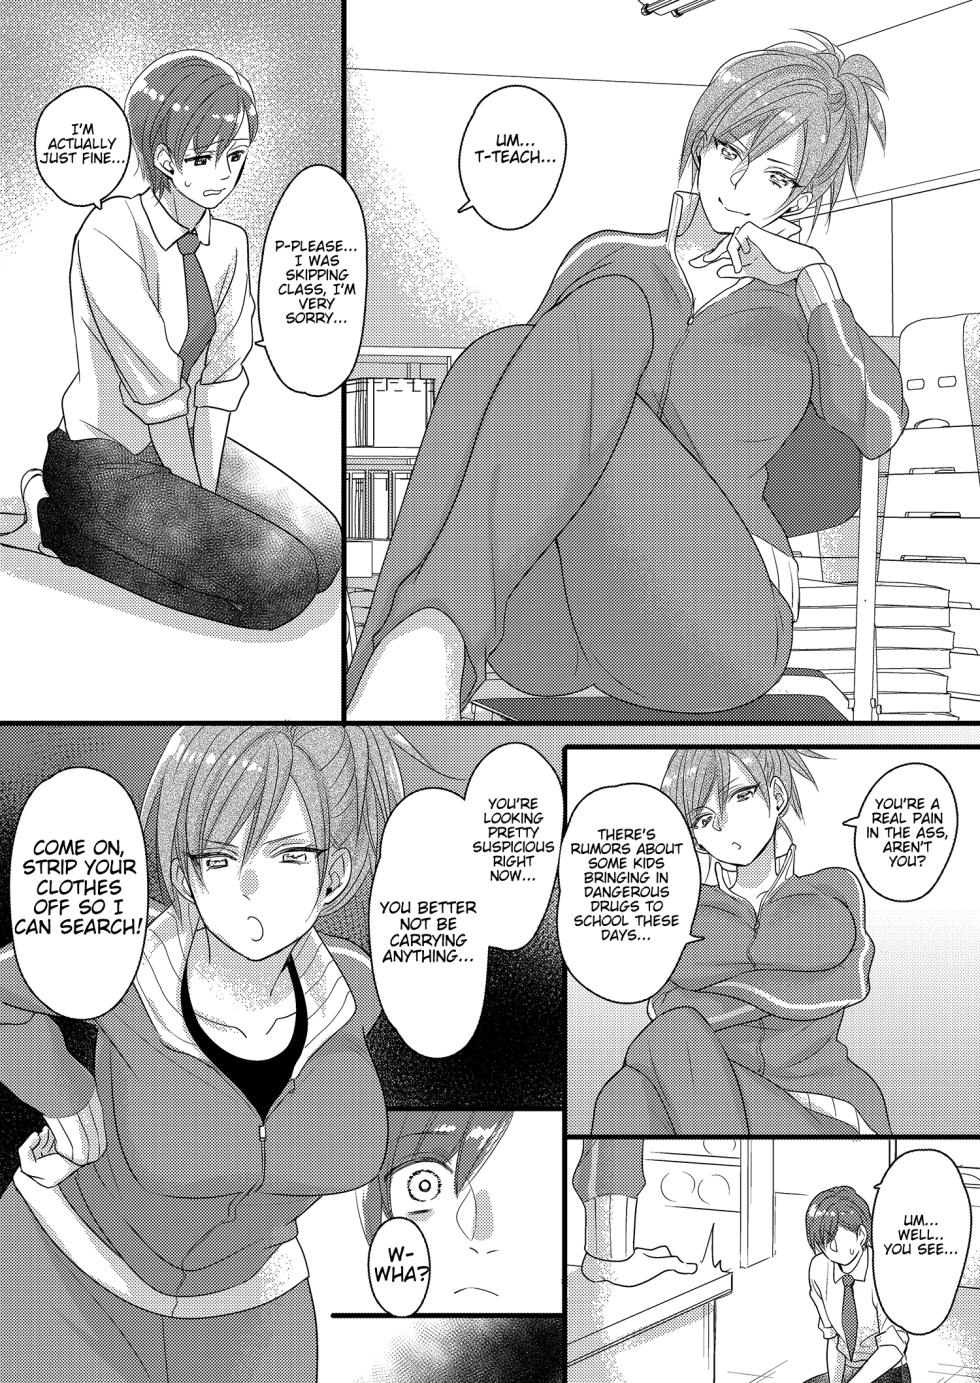 [Marialite (Lyna)] Haru to Sana 2 ～Love Connected Through Cosplay～[English] [Mikodayo] - Page 19